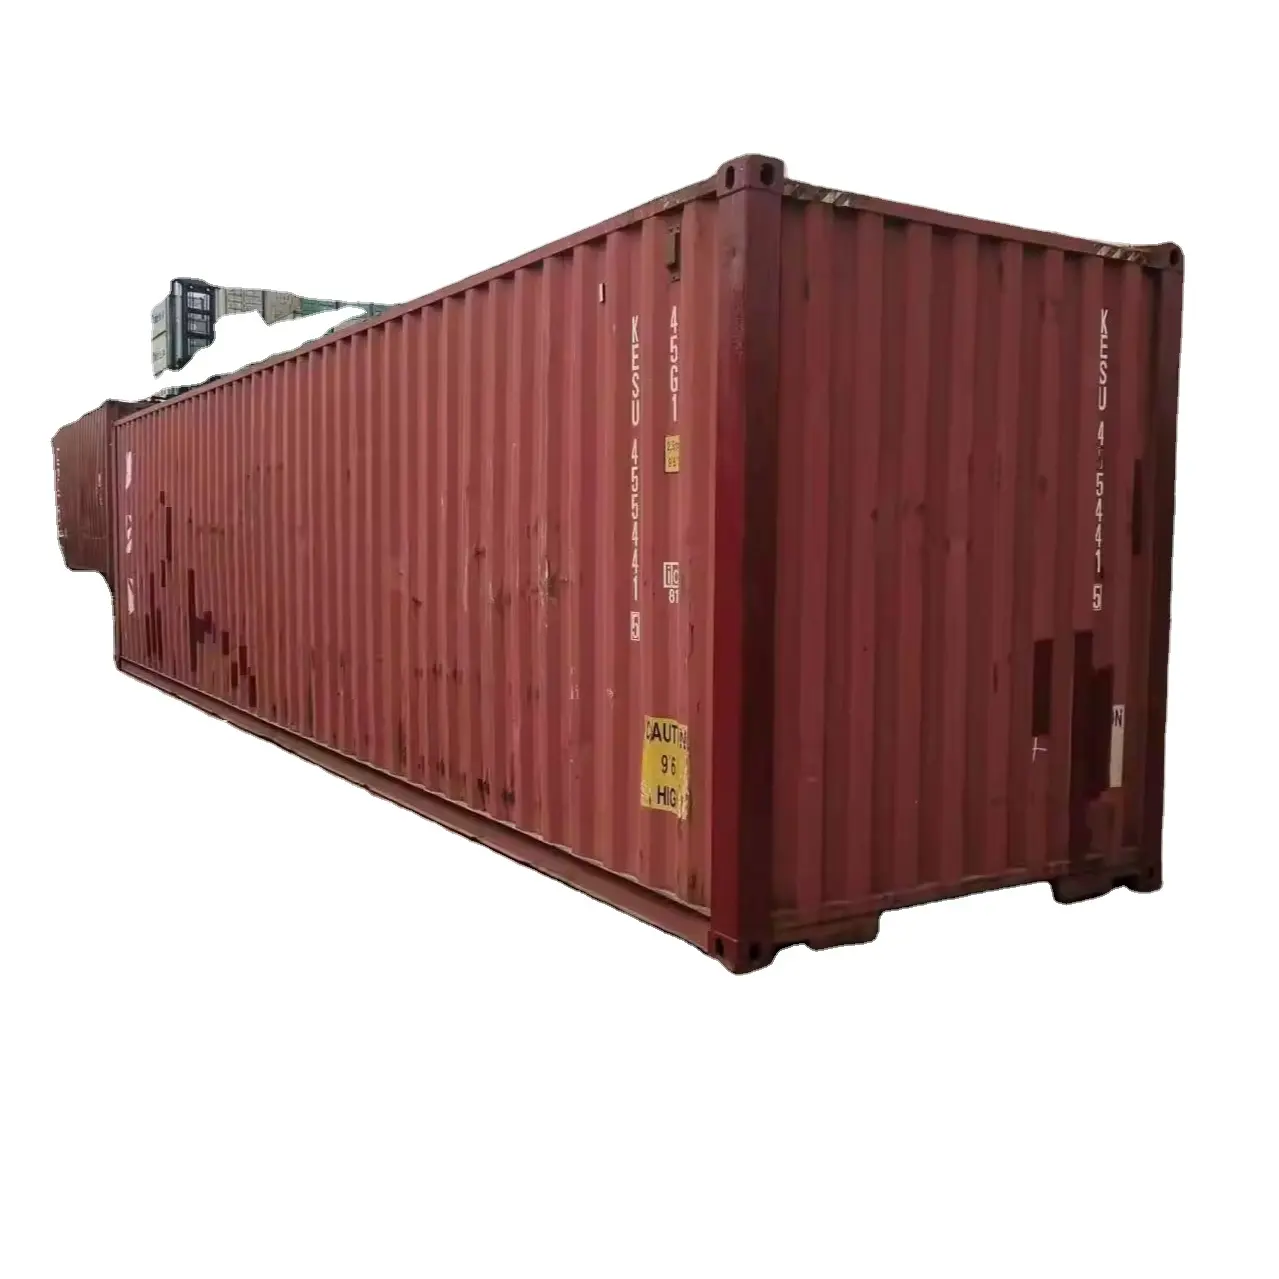 from China to USA Canada New container for sale 40 feet High Cube Maritime Container